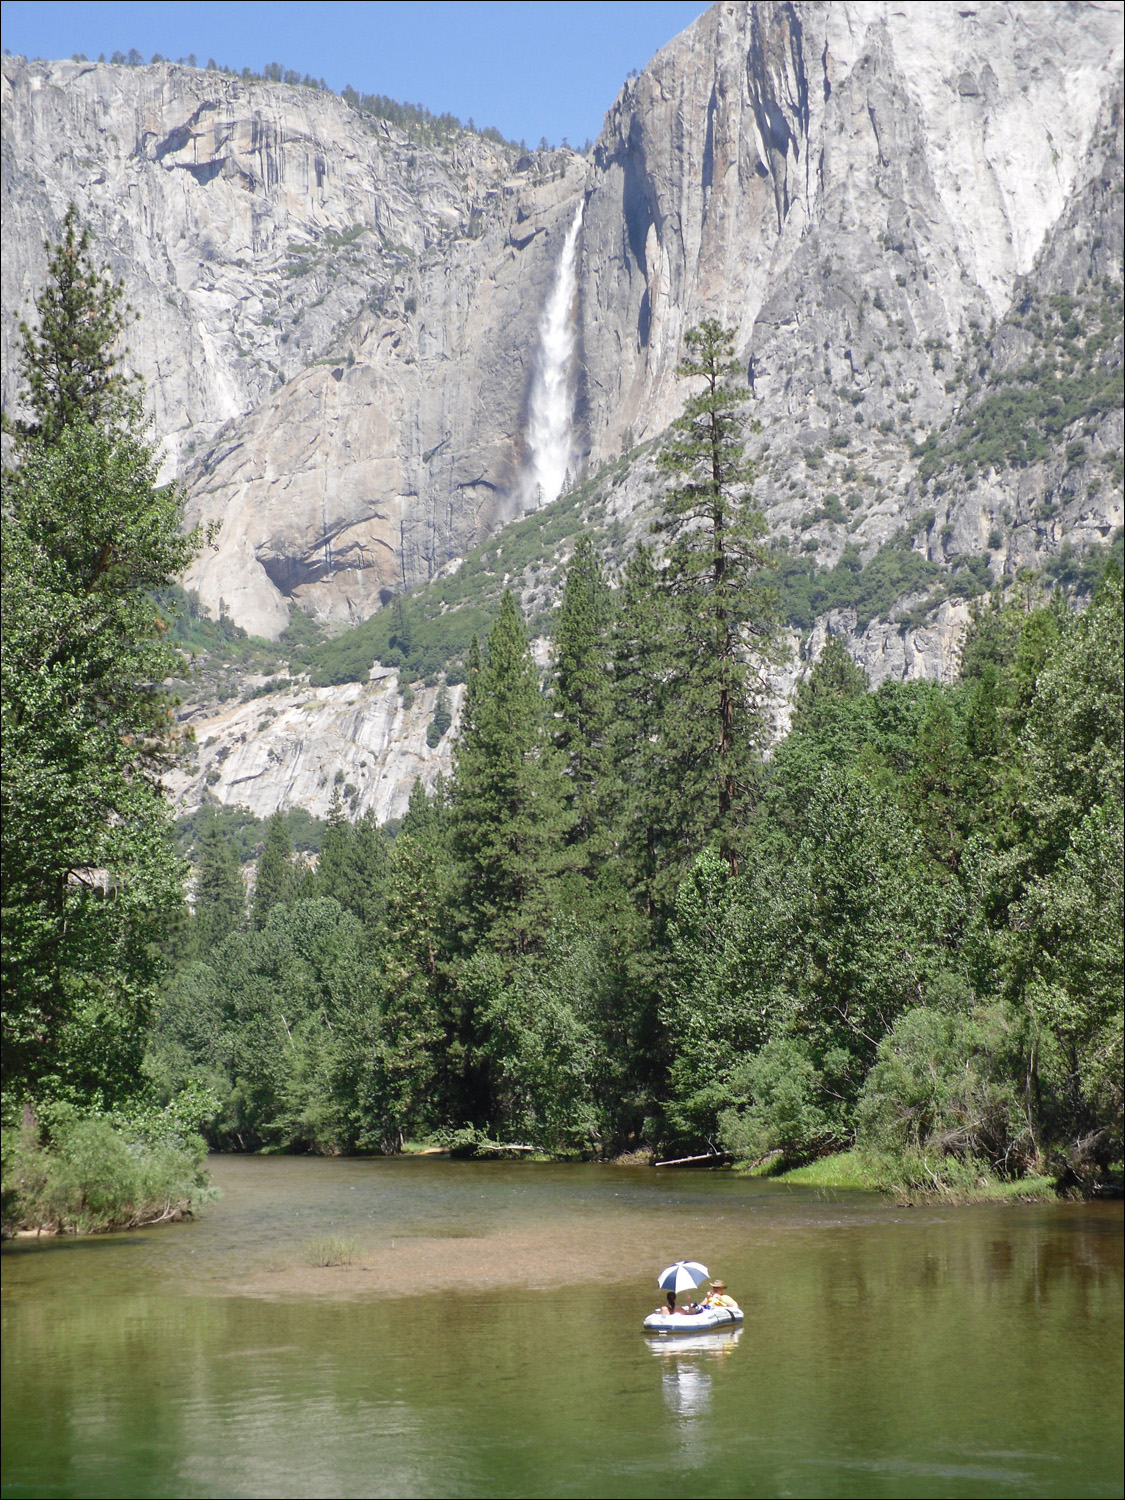 Merced River alongside Housekeeping with Yosemite Falls in te background~ and a rafter